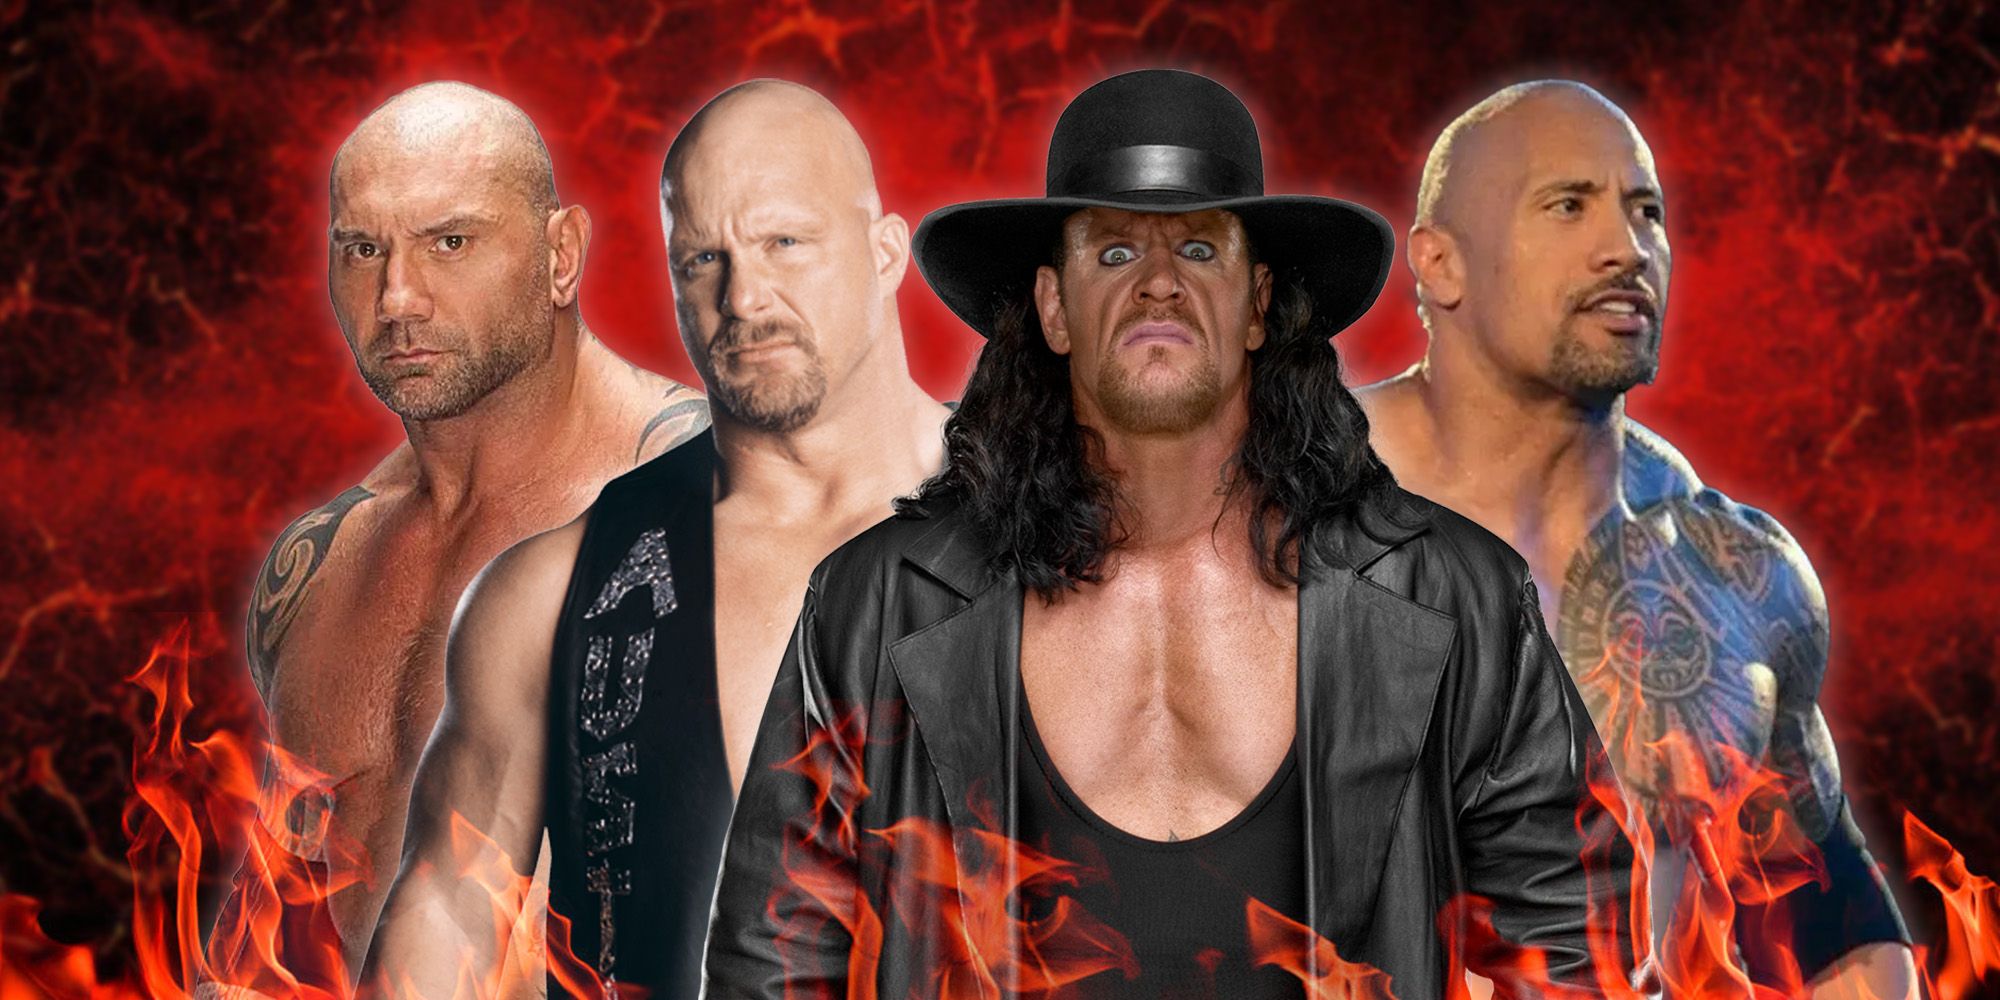 Collage featuring Batista, Stone Cold Steve Austin, The Undertaker and The Rock.